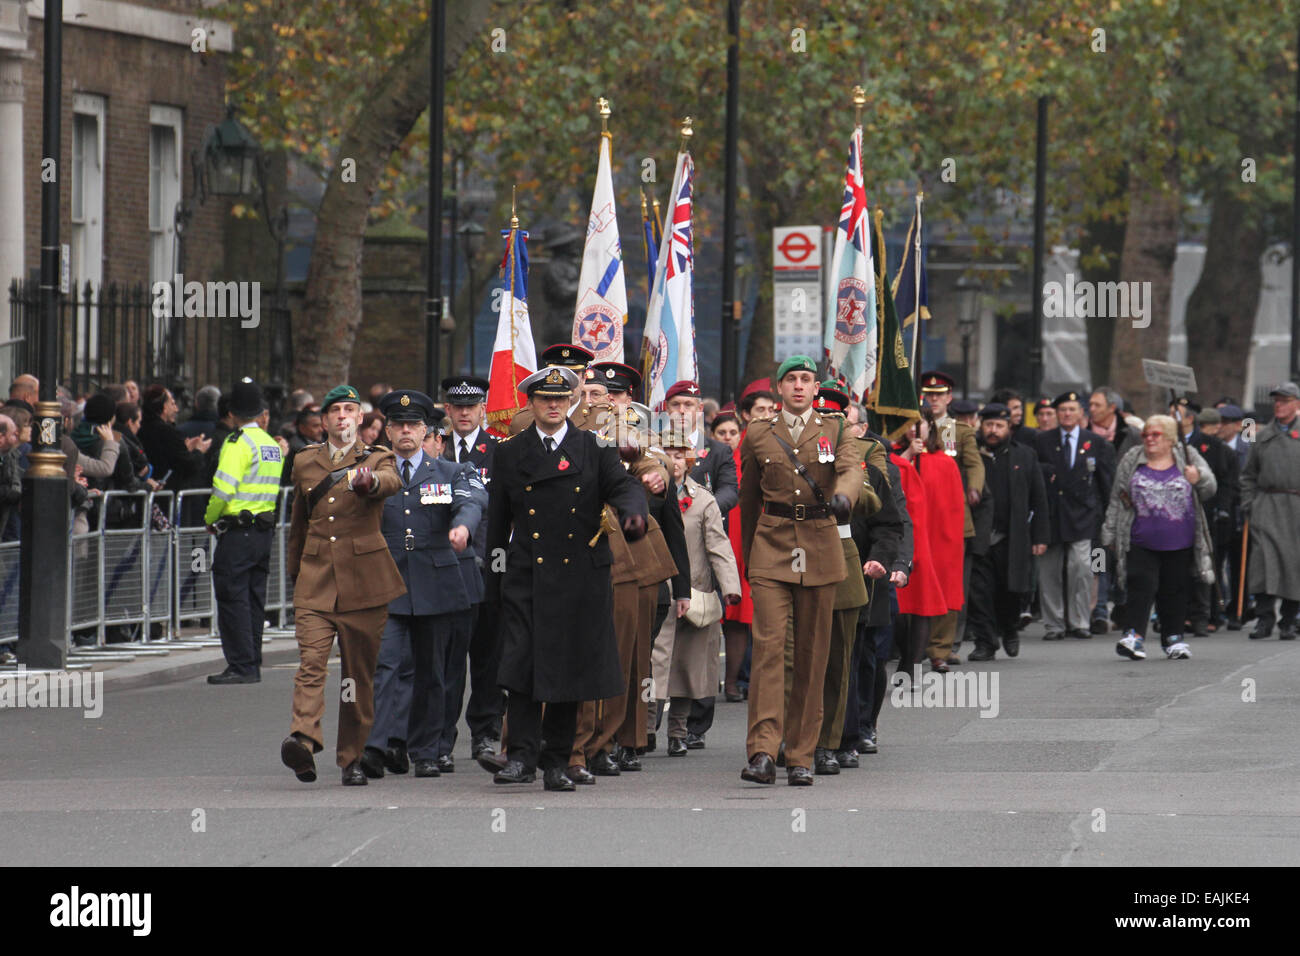 London, UK 16 November 2014. Members of the Jewish community in London attend a Remembrance Parade at the Cenotaph. Whitehall was closed for the ceremony for most of the afternoon. Photo: David Mbiyu/ Alamy Live News Stock Photo